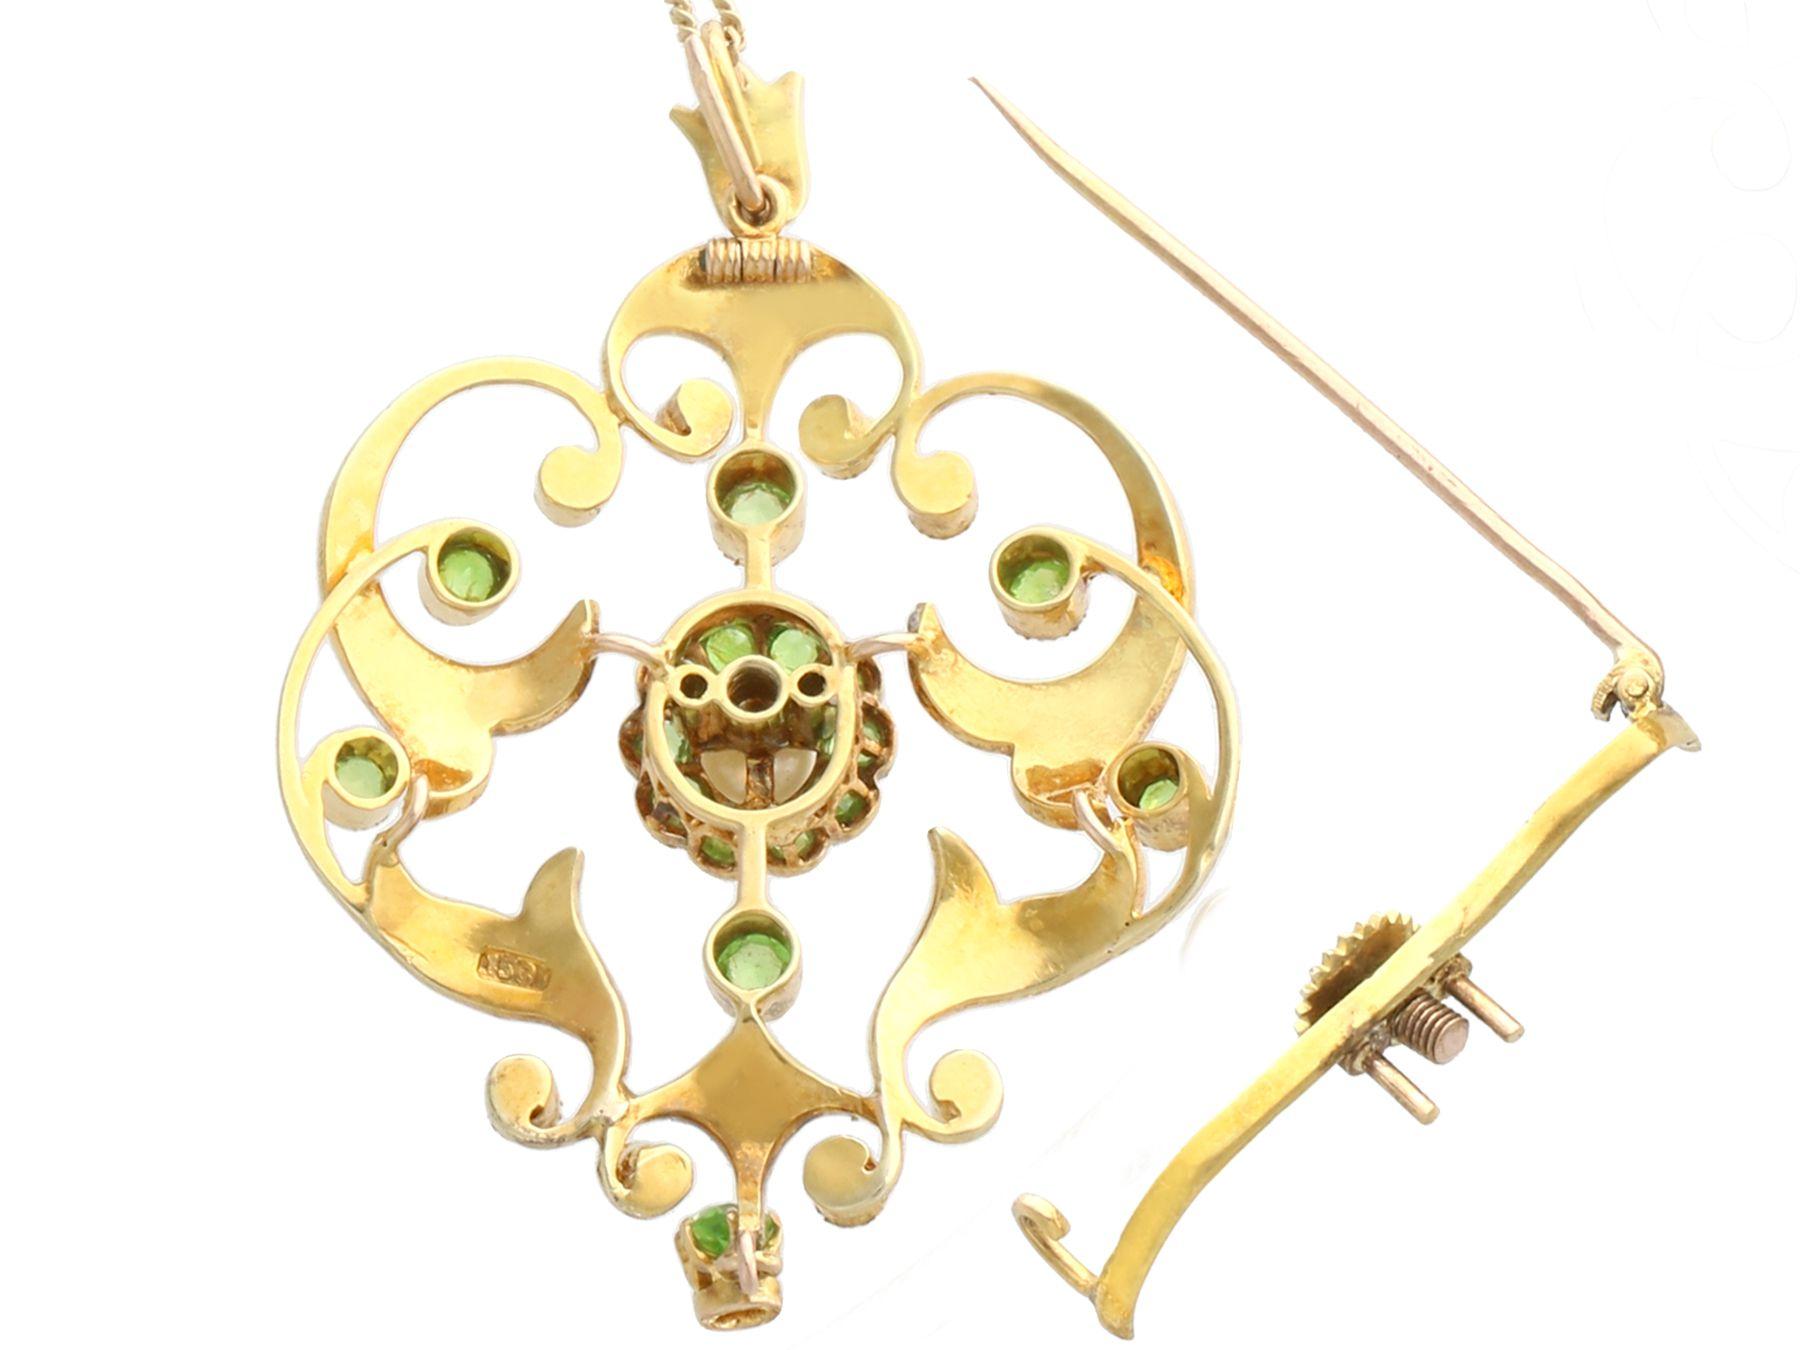 Women's or Men's Antique 1.19 Carat Demantoid Garnet and Seed Pearl Yellow Gold Pendant Brooch For Sale